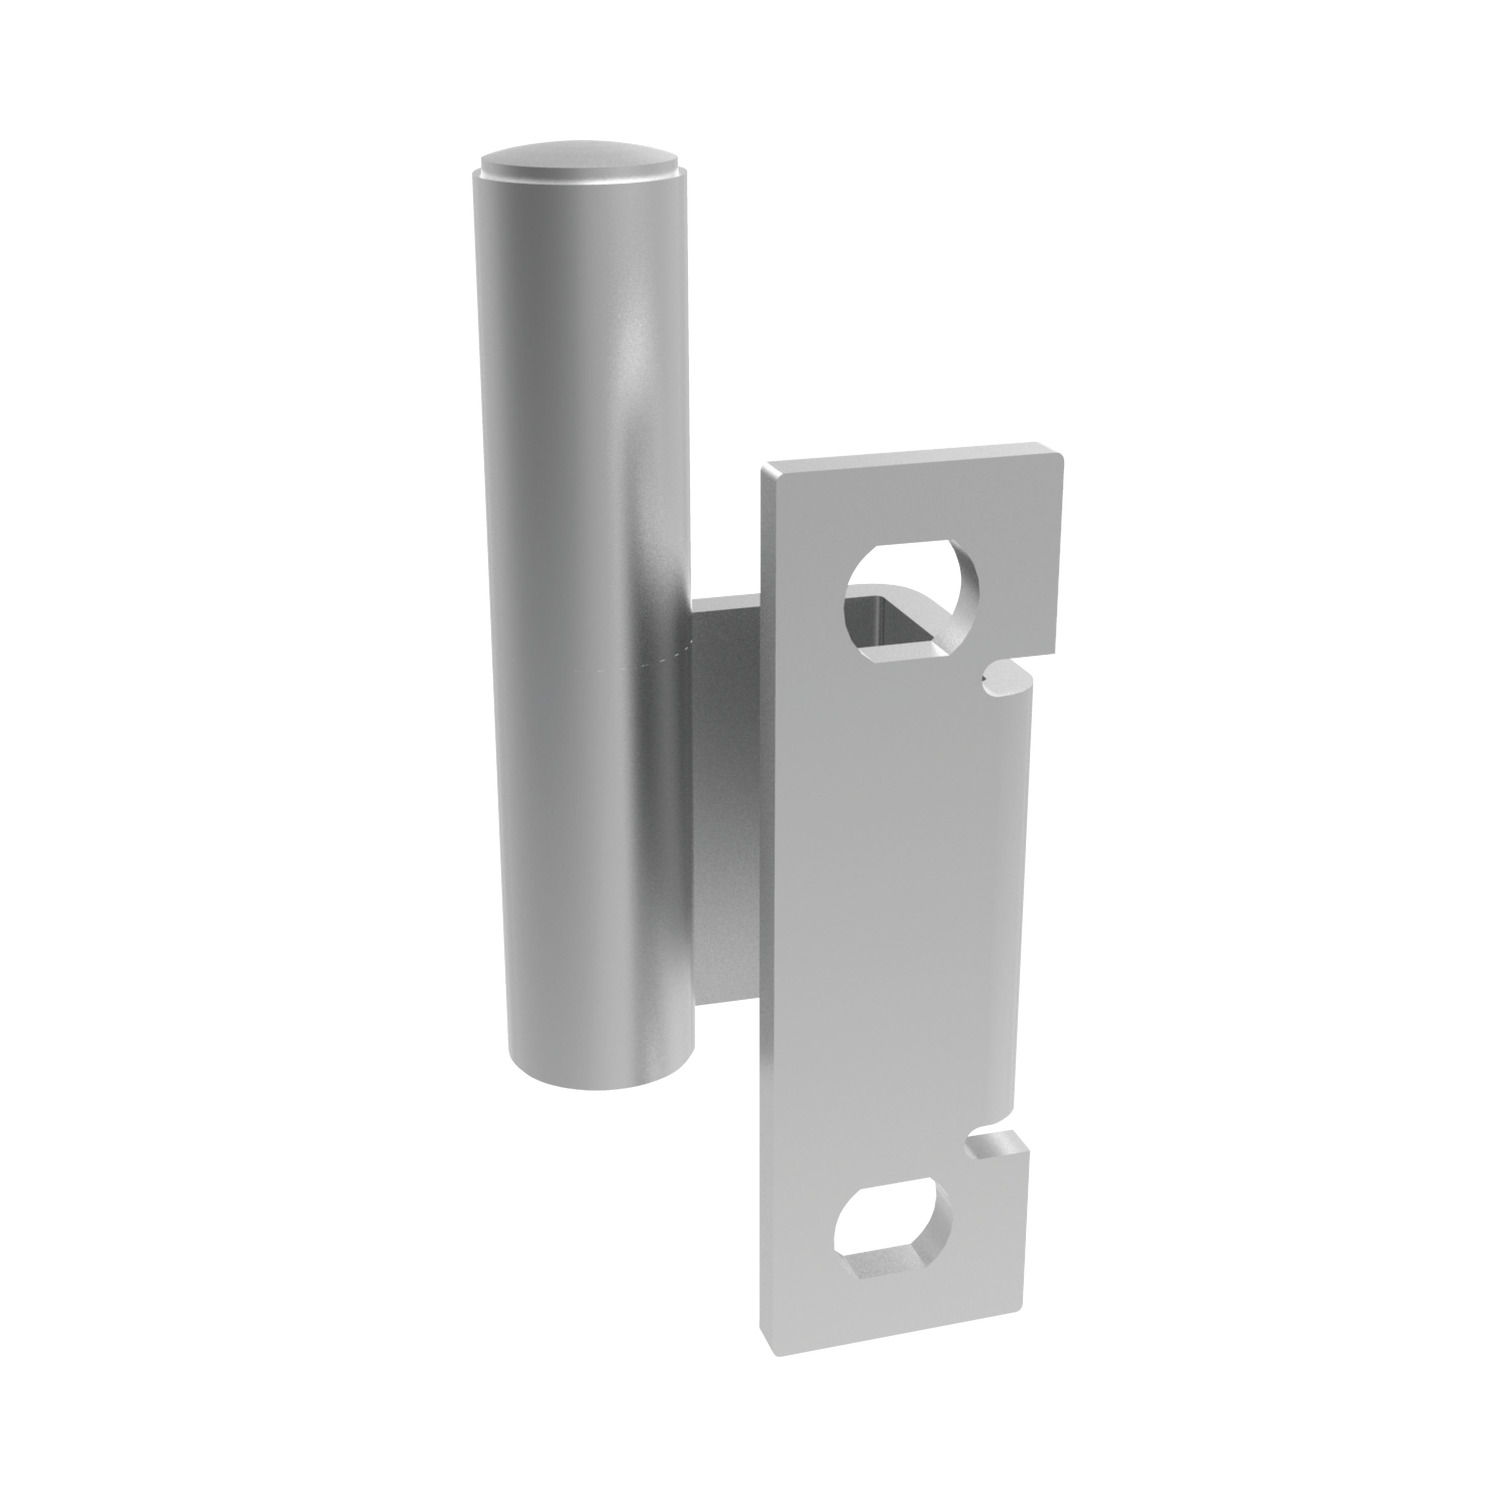 S2170.AW0021 Concealed Pivot Hinges weld and oval head screw